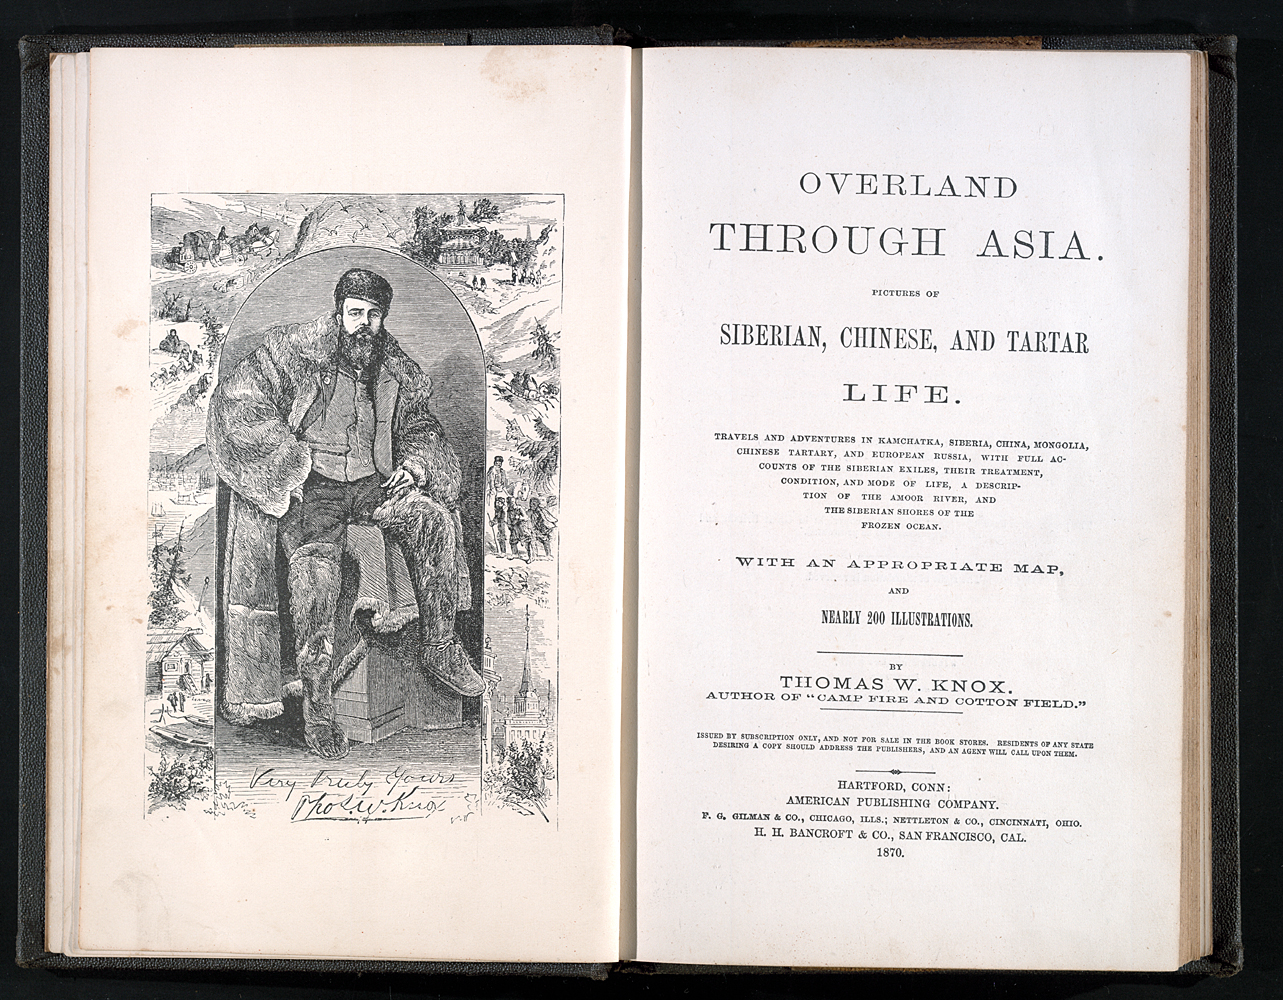 Illustrated Inner Cover of Overland Through Asia Depicting A Siberian Man and Scenes of Life